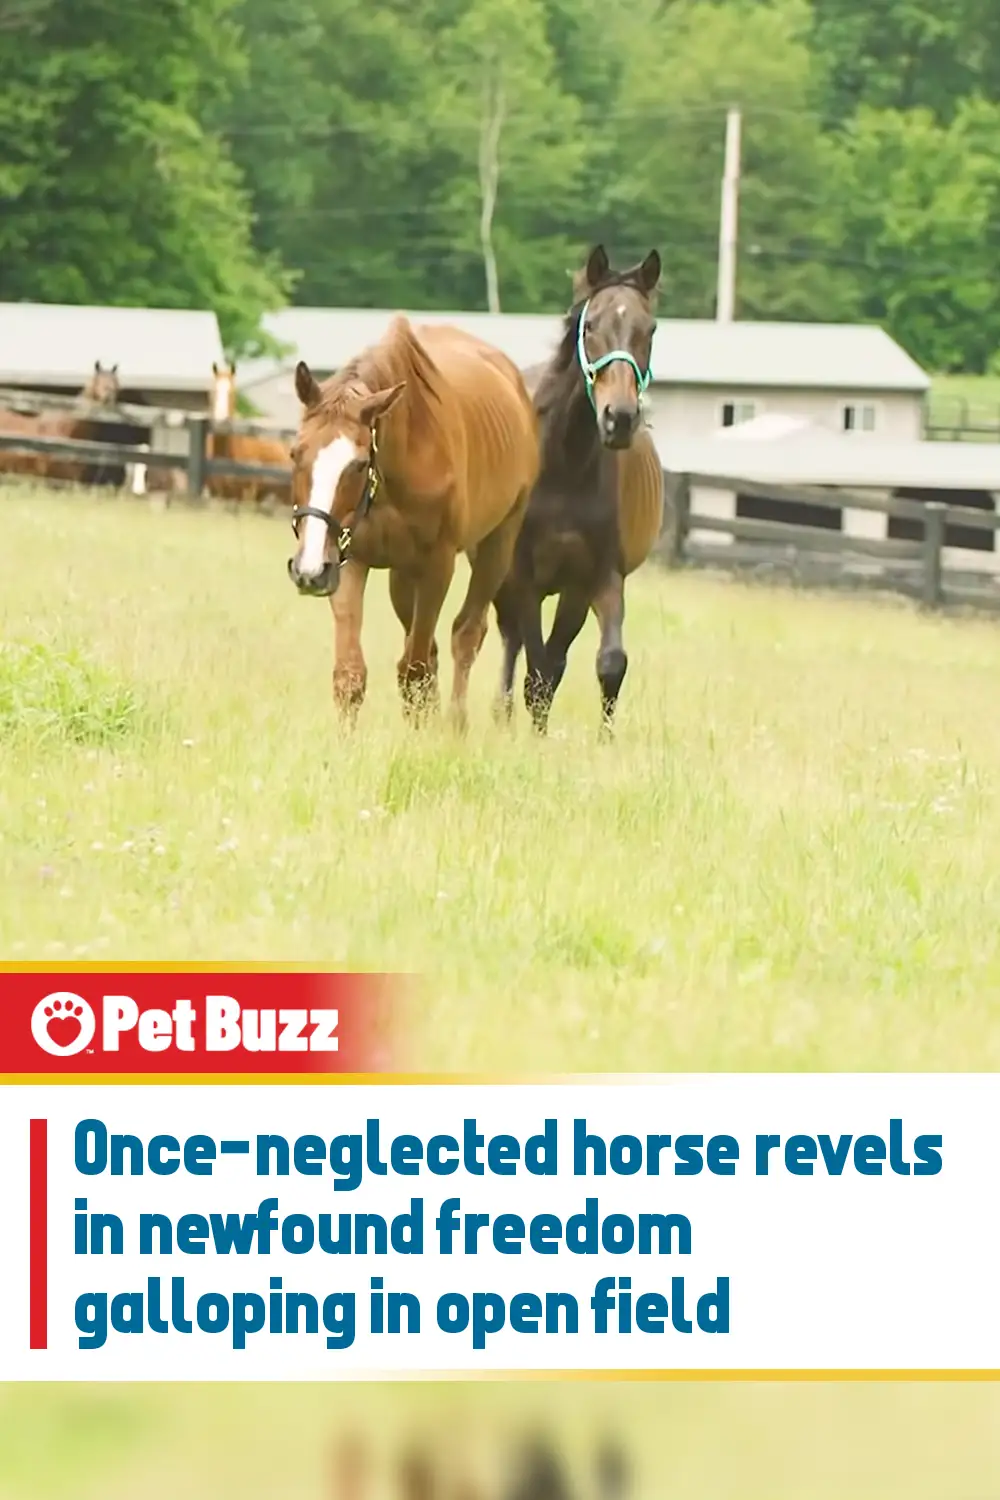 Once-neglected horse revels in newfound freedom galloping in open field